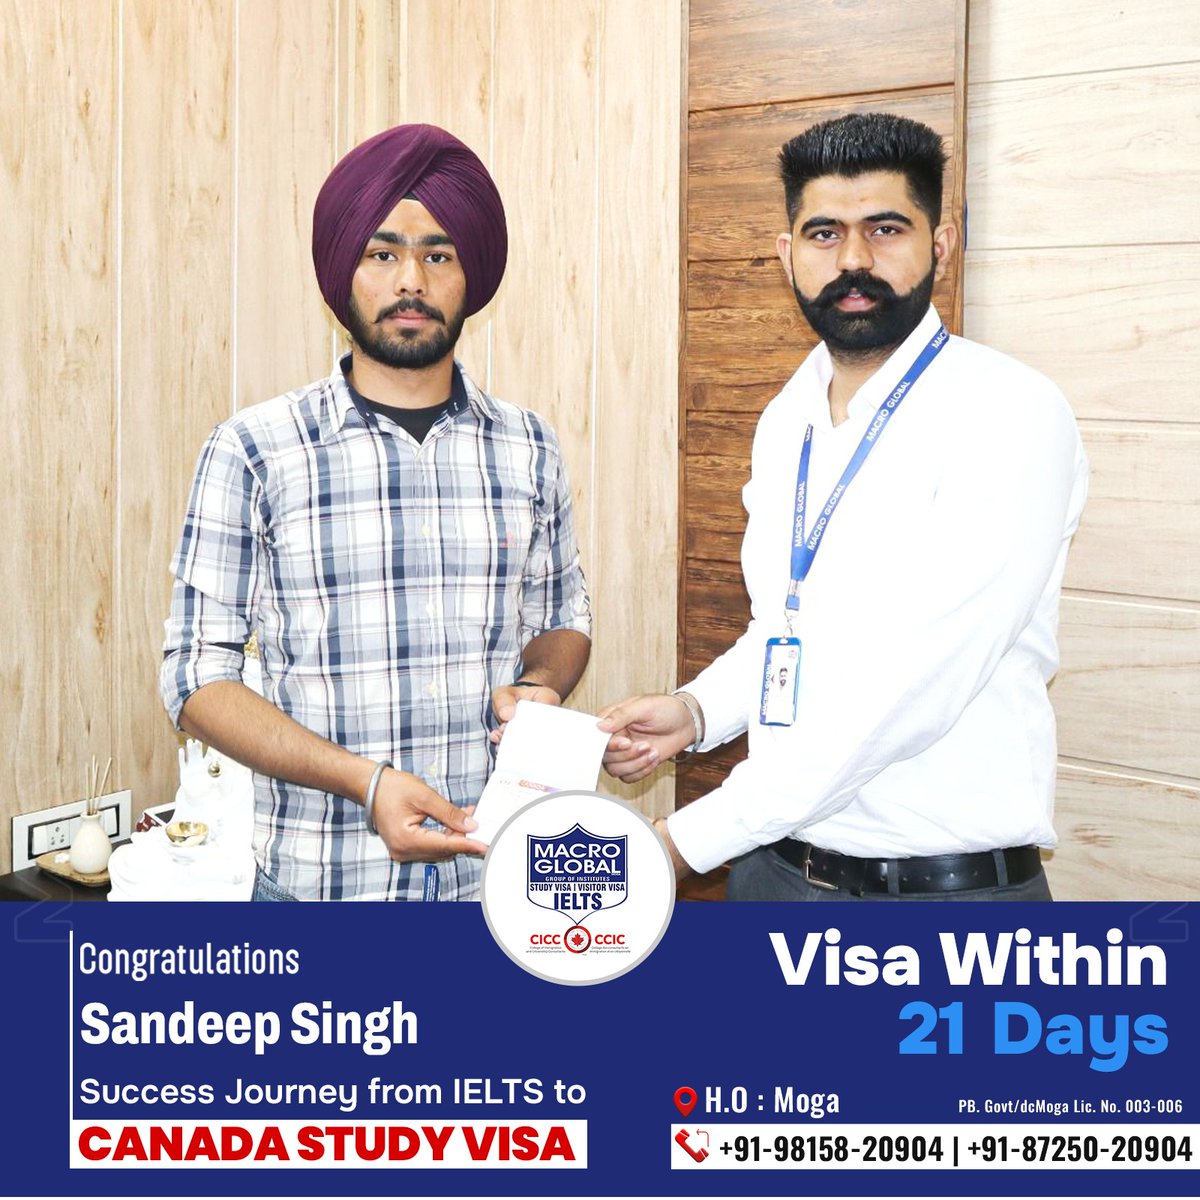 Huge congrats to Sandeep Singh!🎊🇨🇦   
His Canada study visa was approved in just 21 days!  
.
#MacroGlobal #GurmilapSinghDalla #Canada #Canadastudyvisa #CanadaVisaSuccess